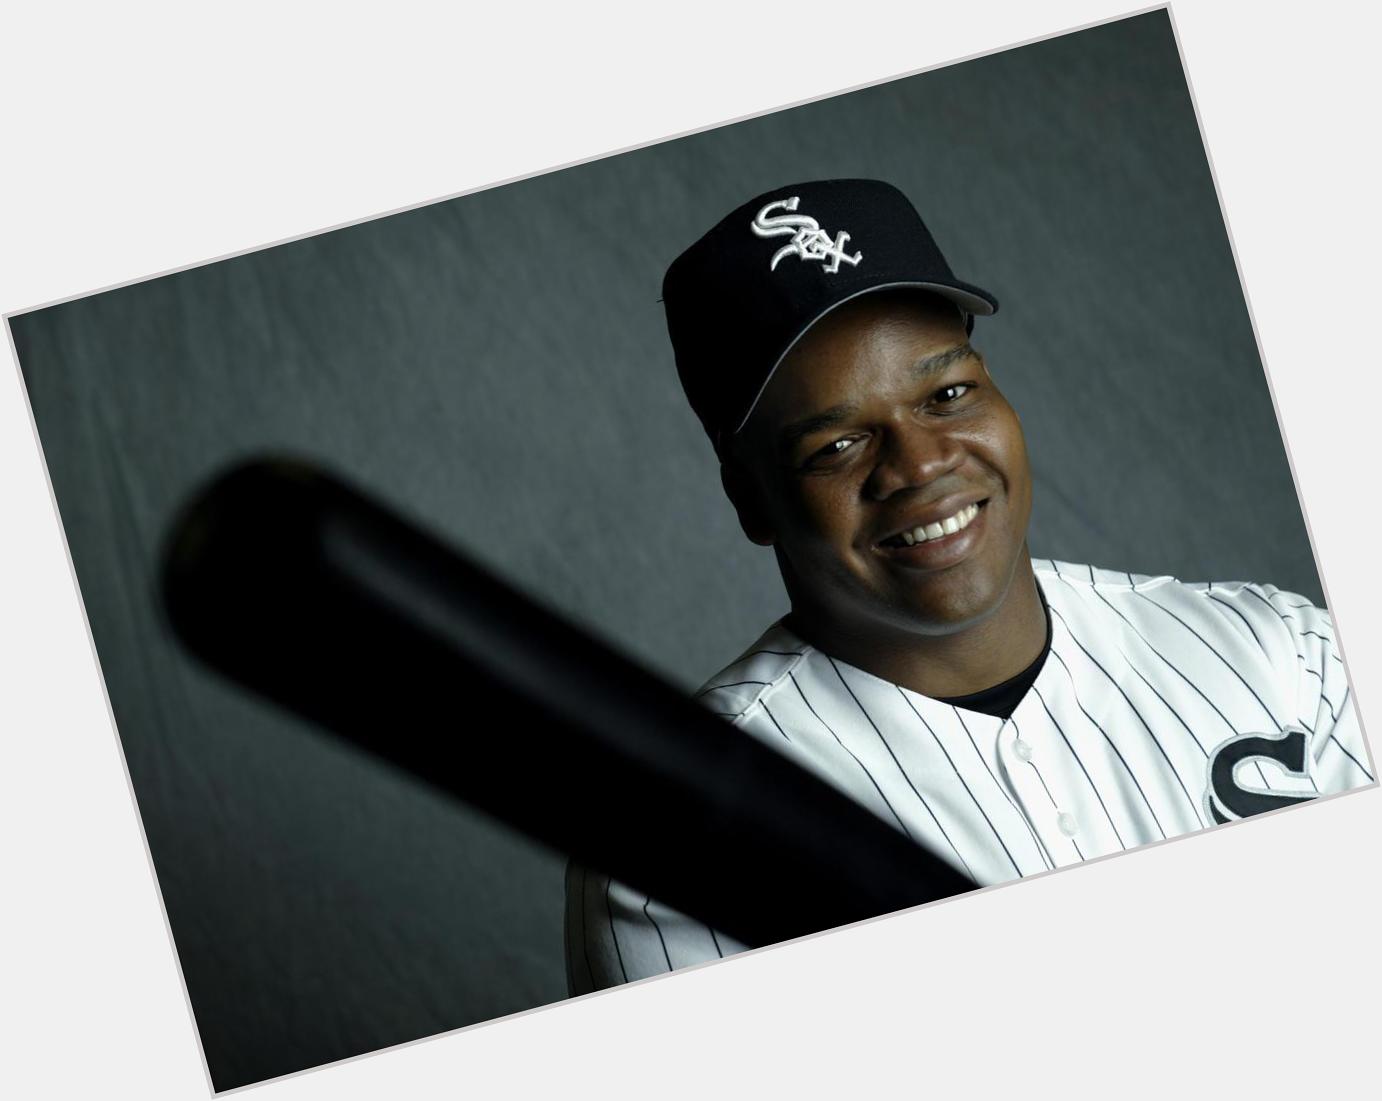 Happy 47th birthday to Hall of Famer Frank Thomas. (138 Hall Rating, all time)  